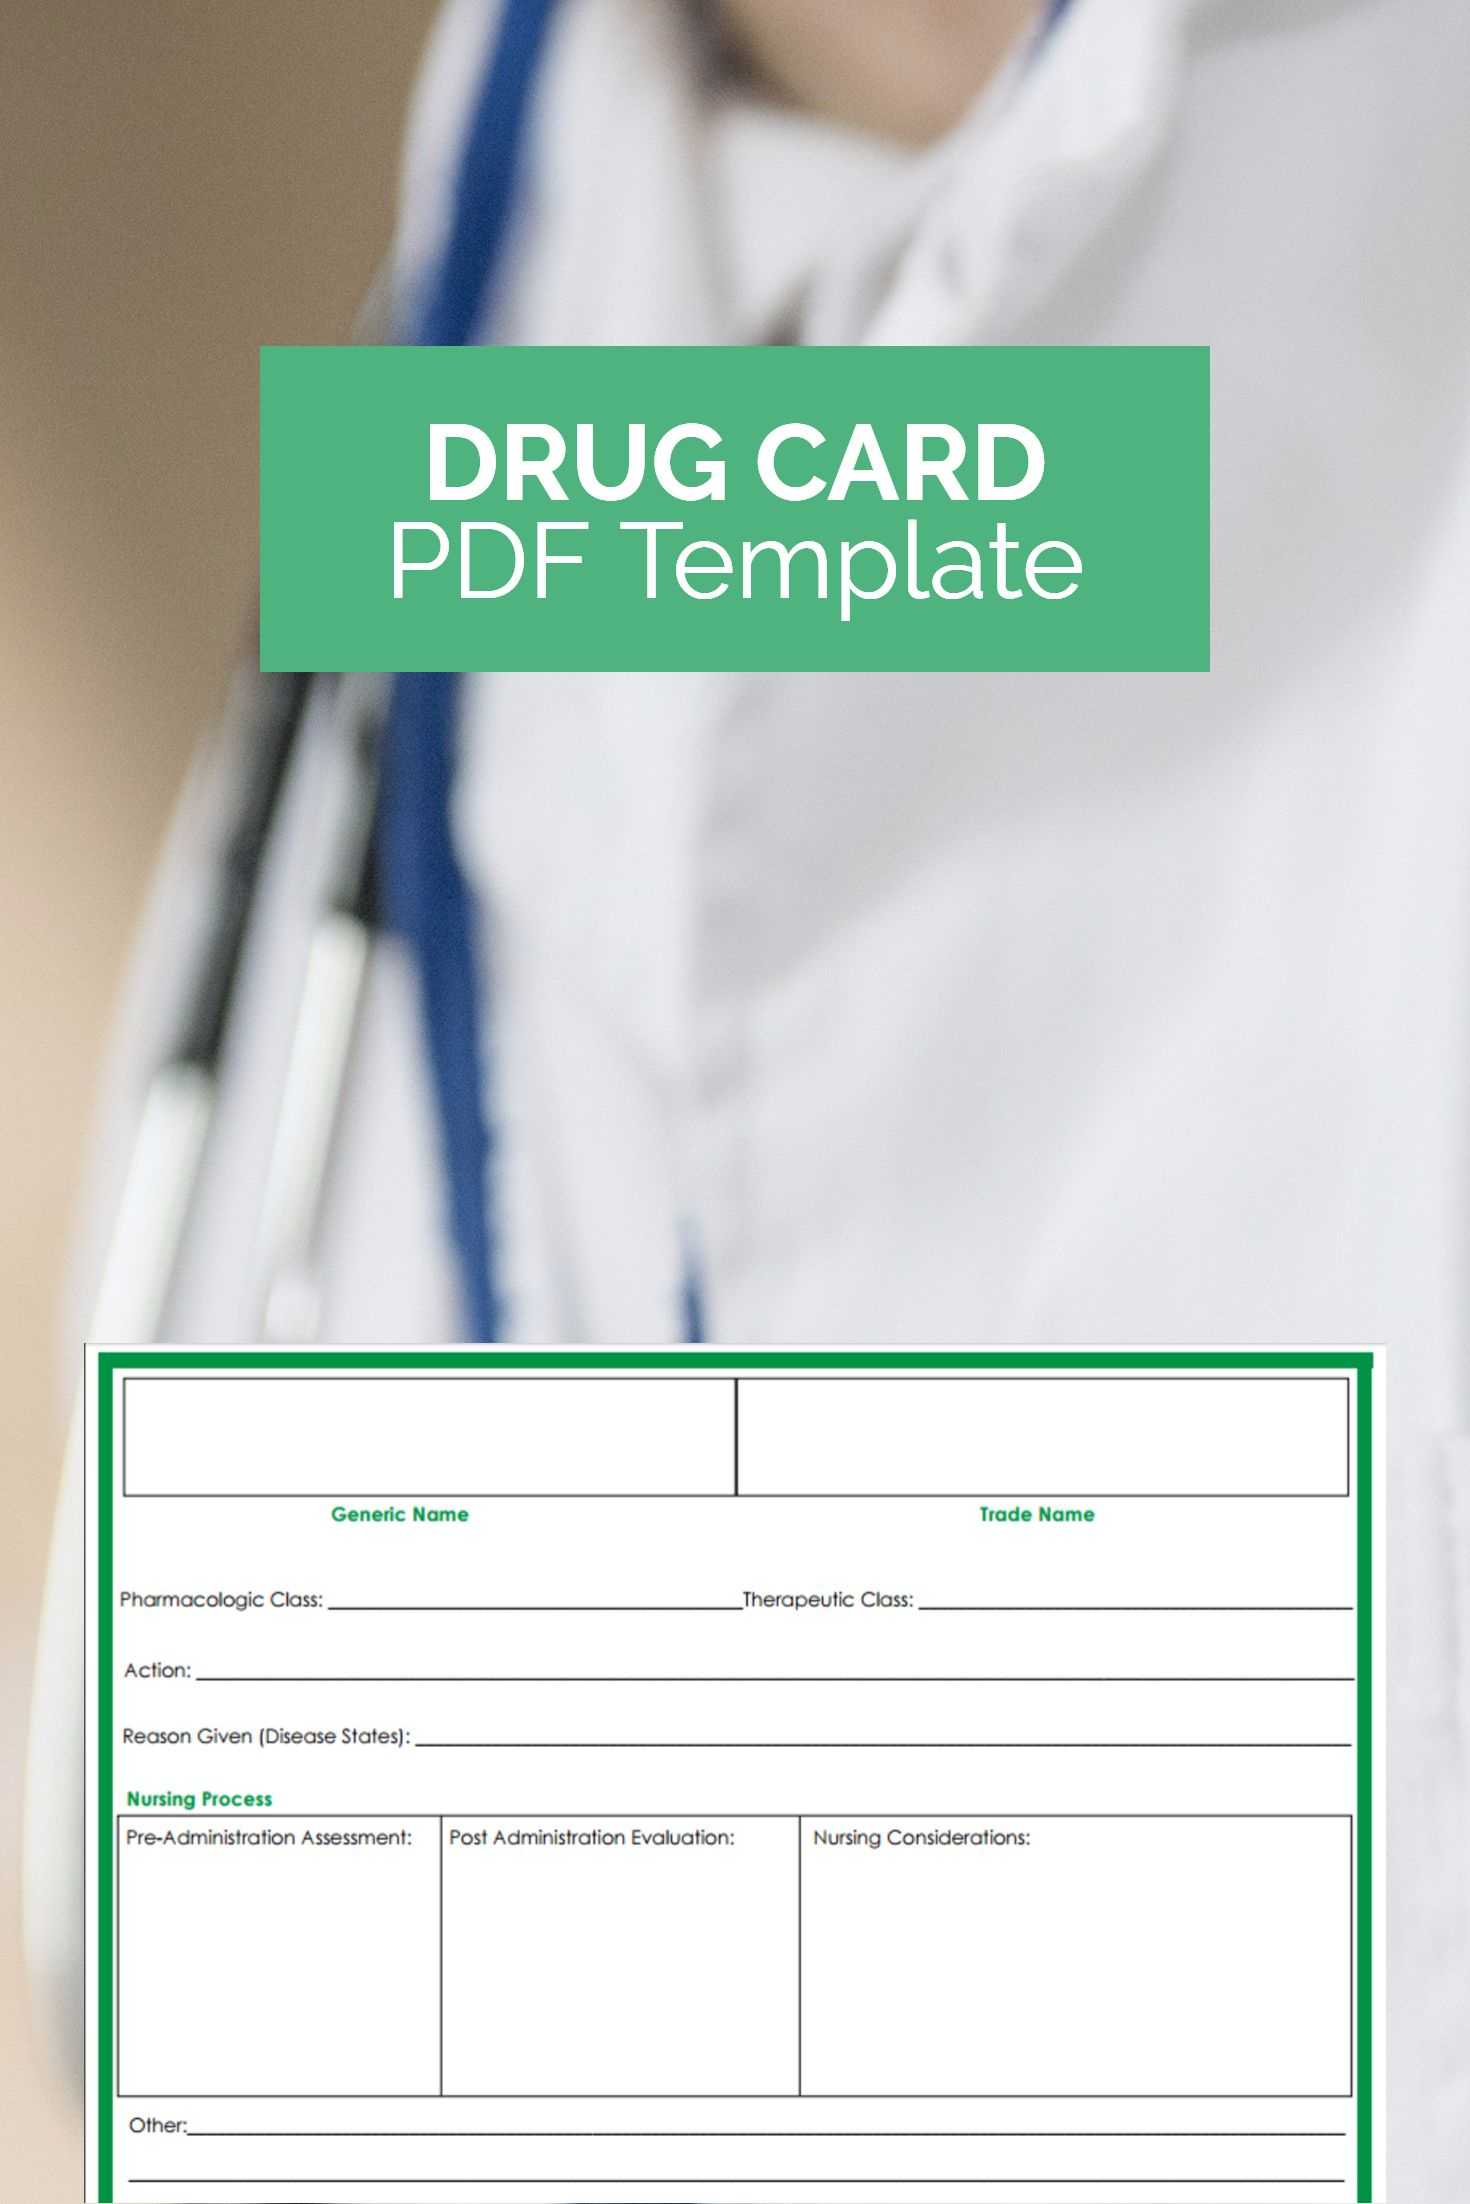 Want A Free Drug Card Template That Can Make Studying Much Throughout Pharmacology Drug Card Template